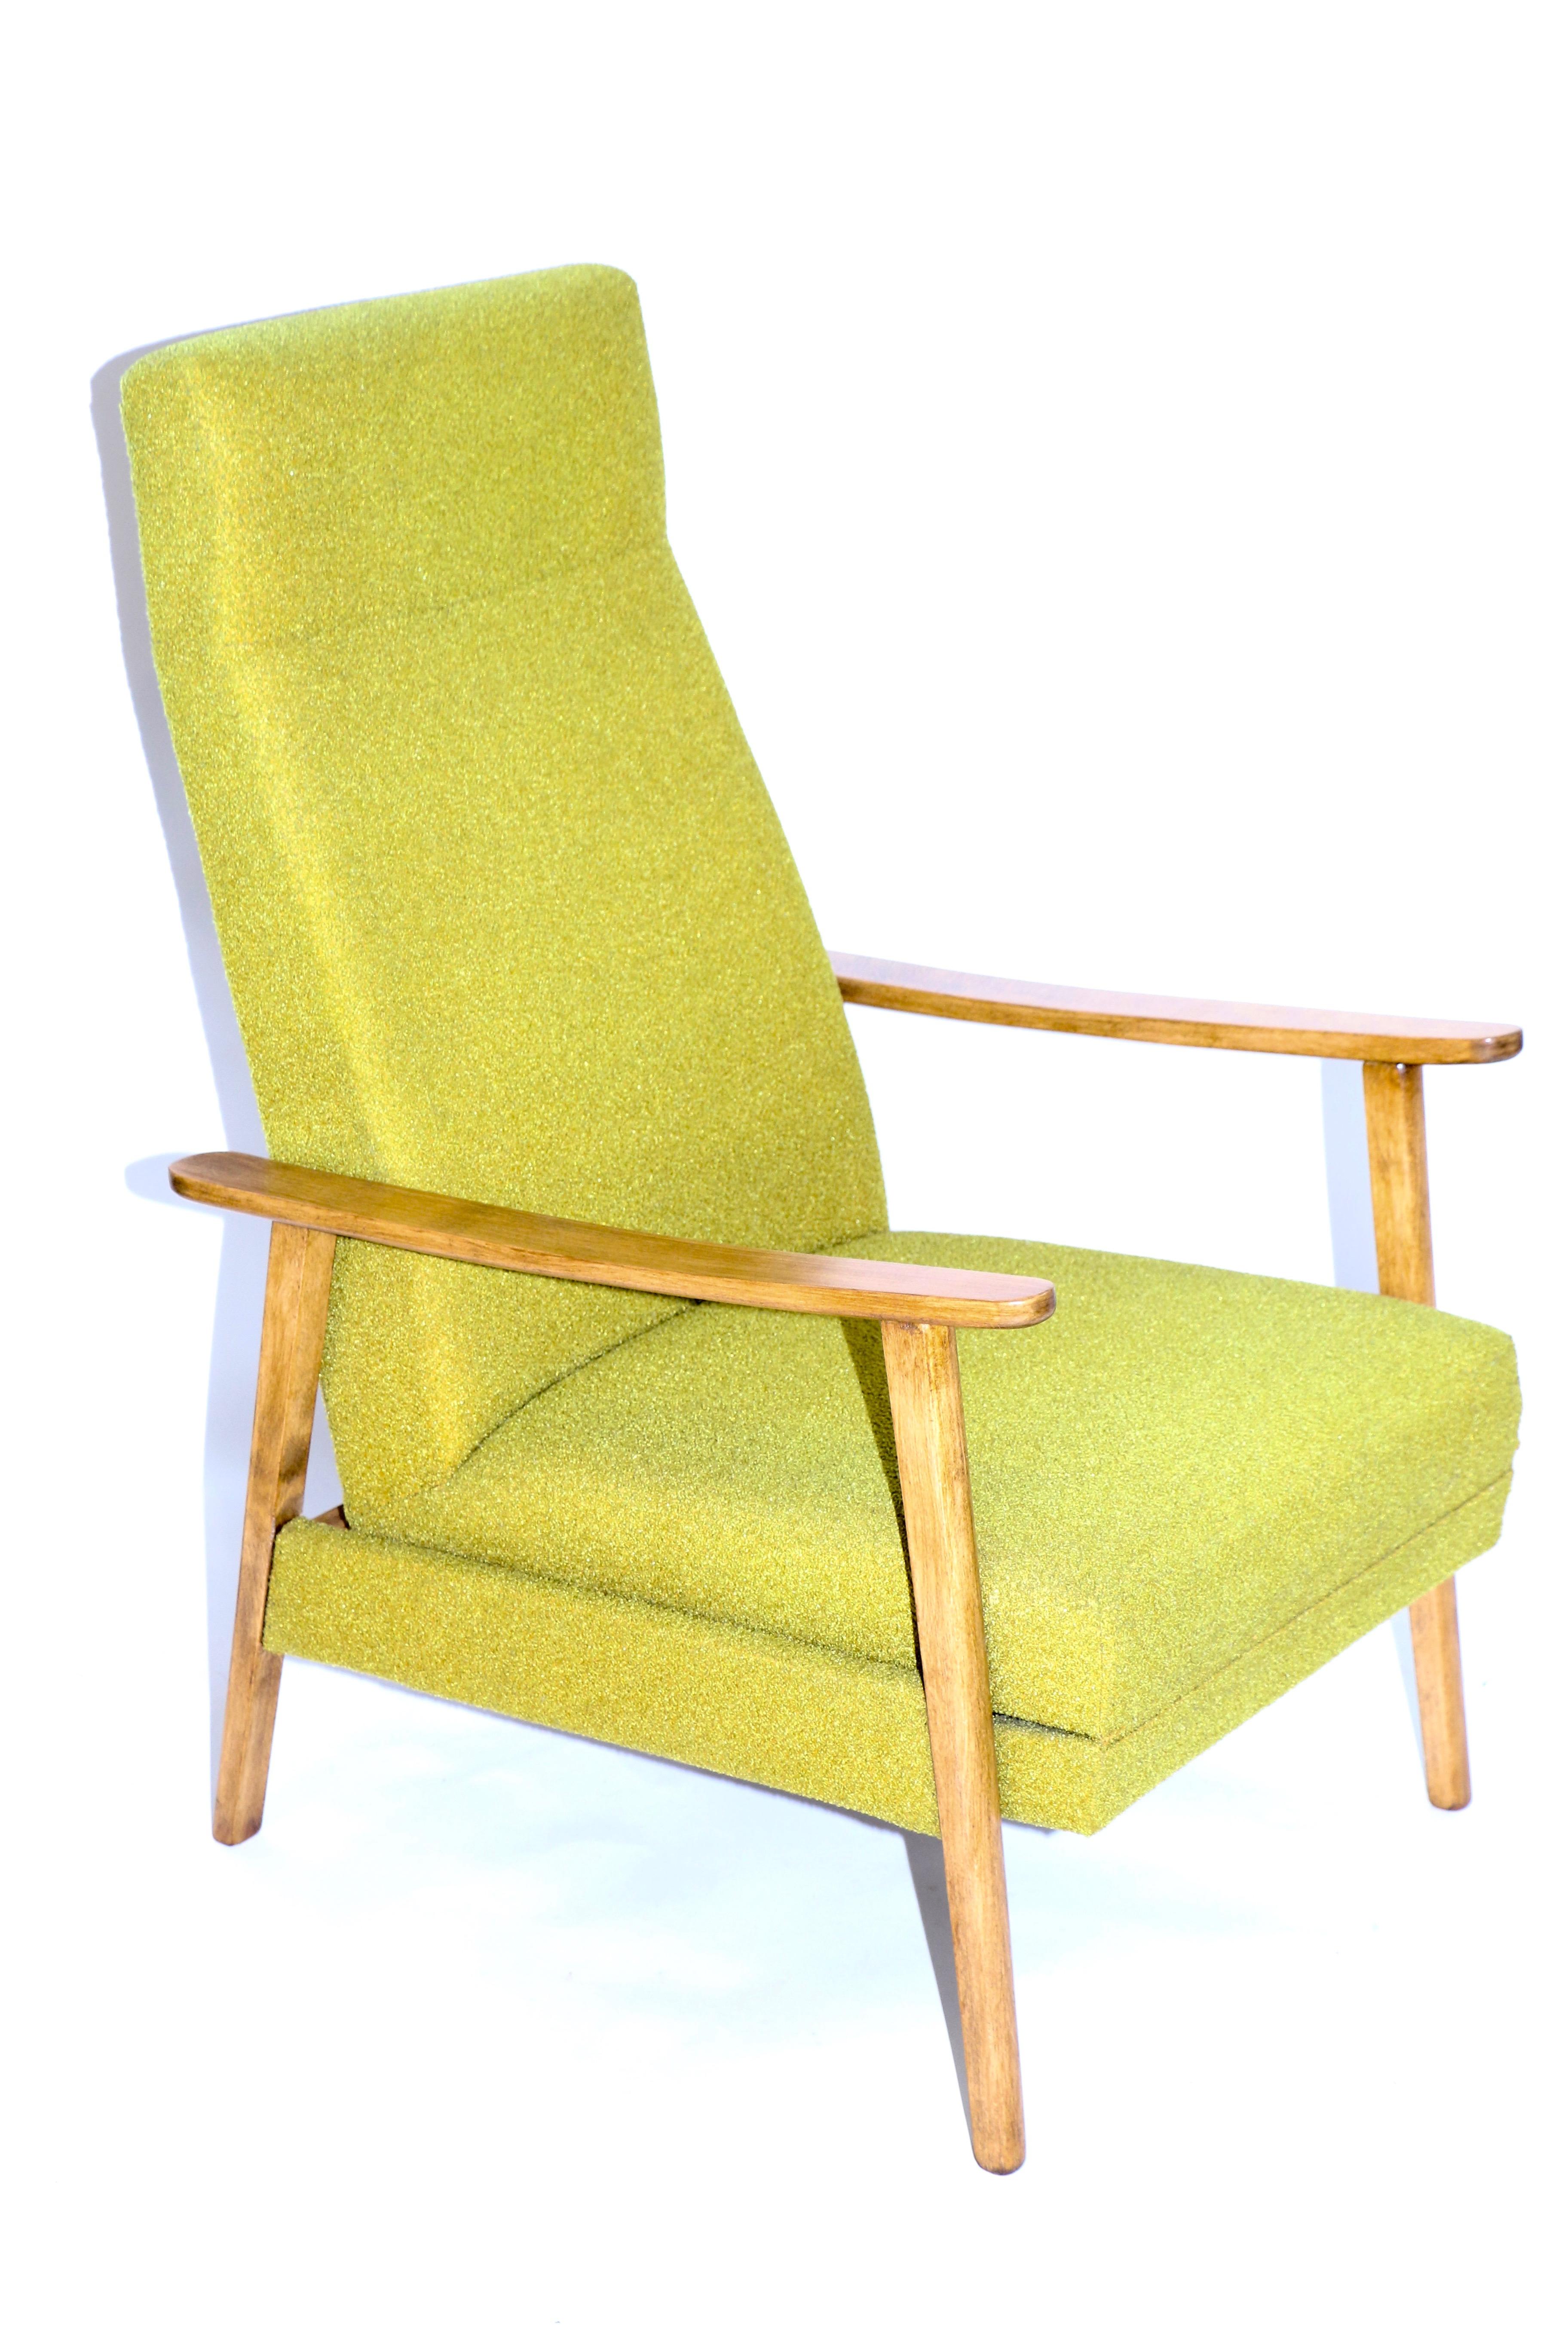 Folding chair, original German production of the 1970s. Preserved in perfect condition. The upholstery has been washed out. The wood has been renewed and re-wax.
Dimensions: height 105 cm, width 65 cm, depth 65 cm, seat height 41 cm, height of